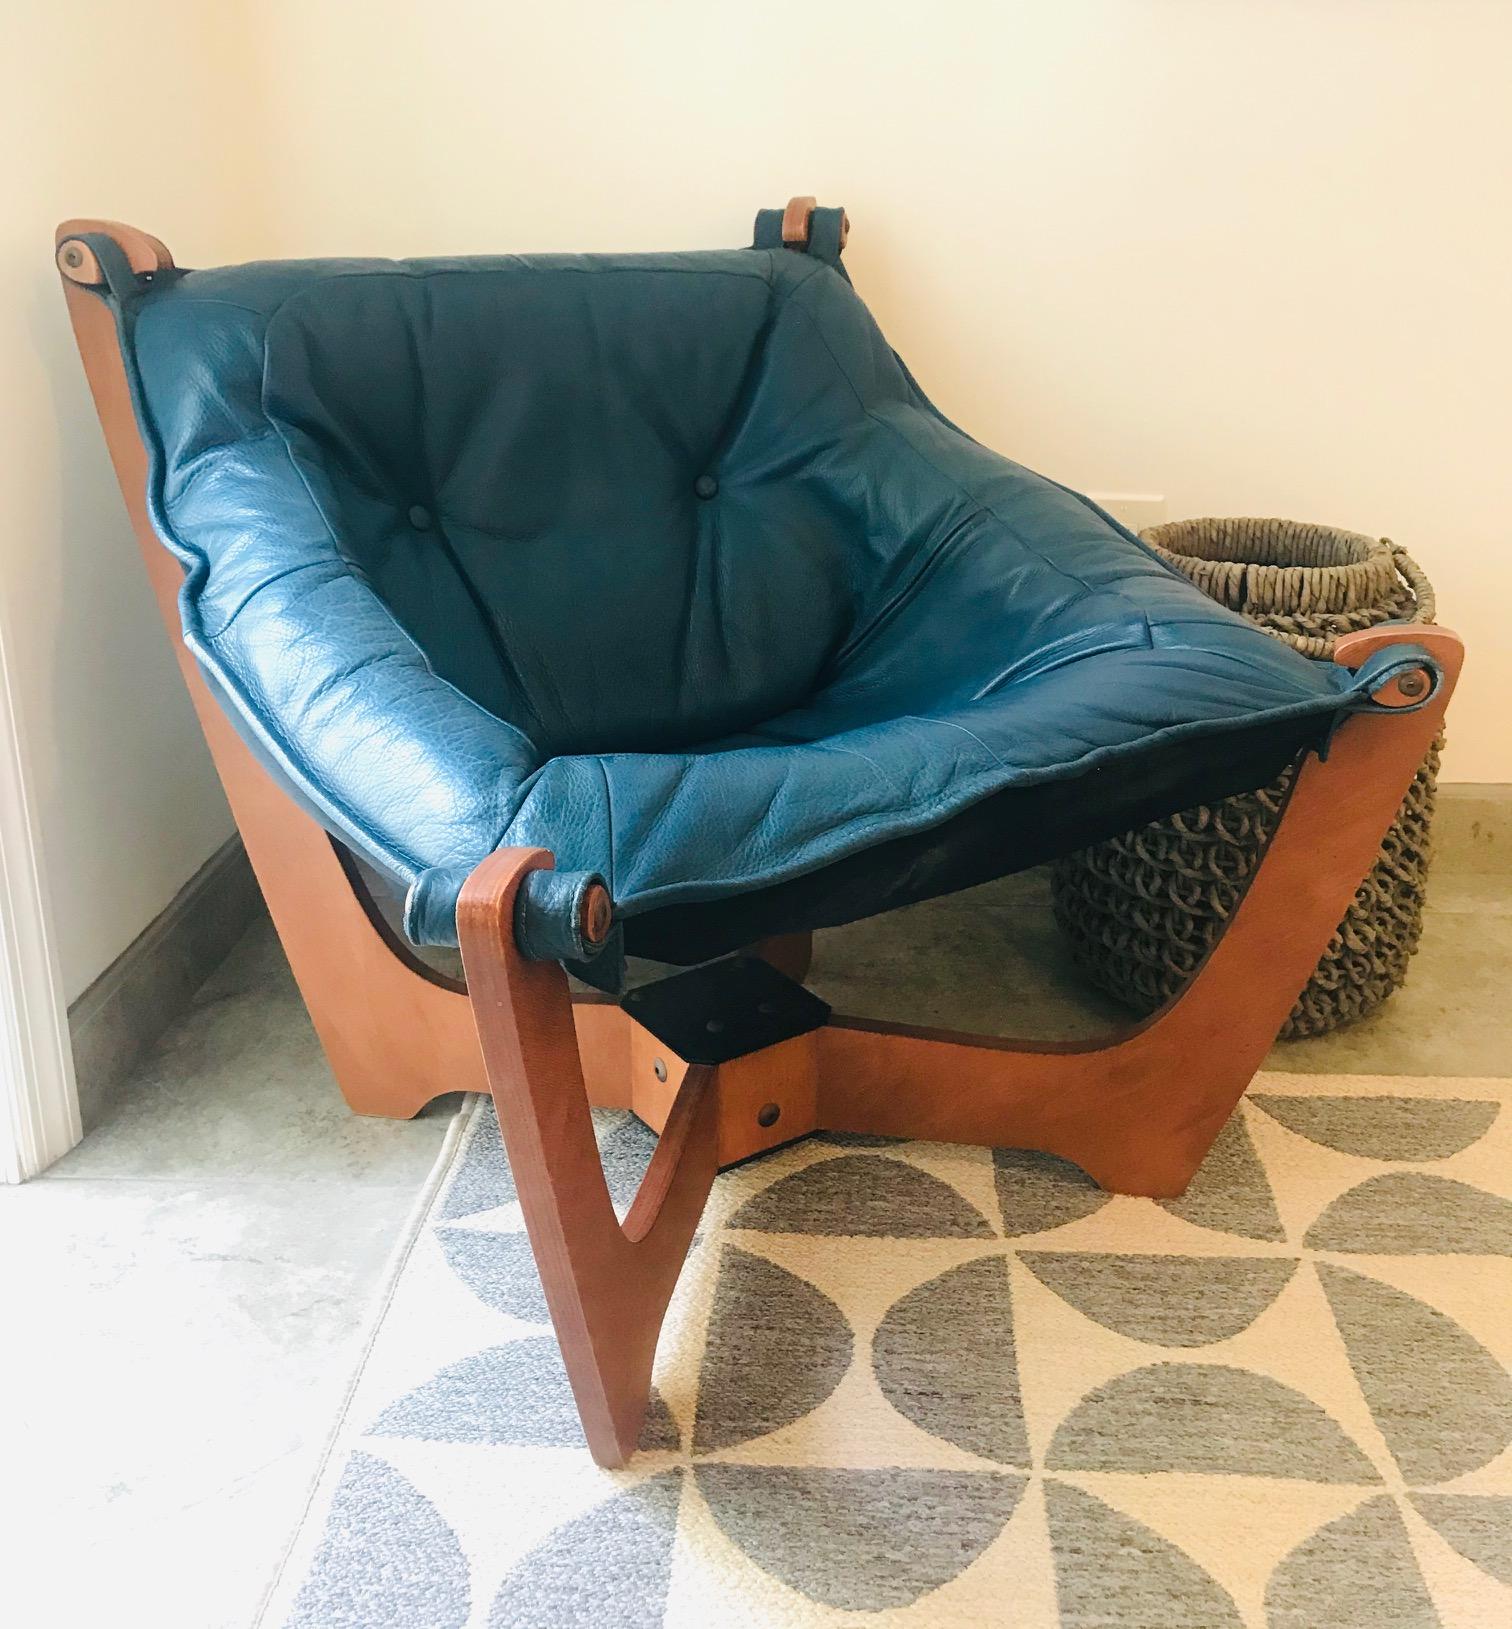 1970s Luna Lounge Chair by Odd Knutsen in Cadet Blue Leather, Norway 1